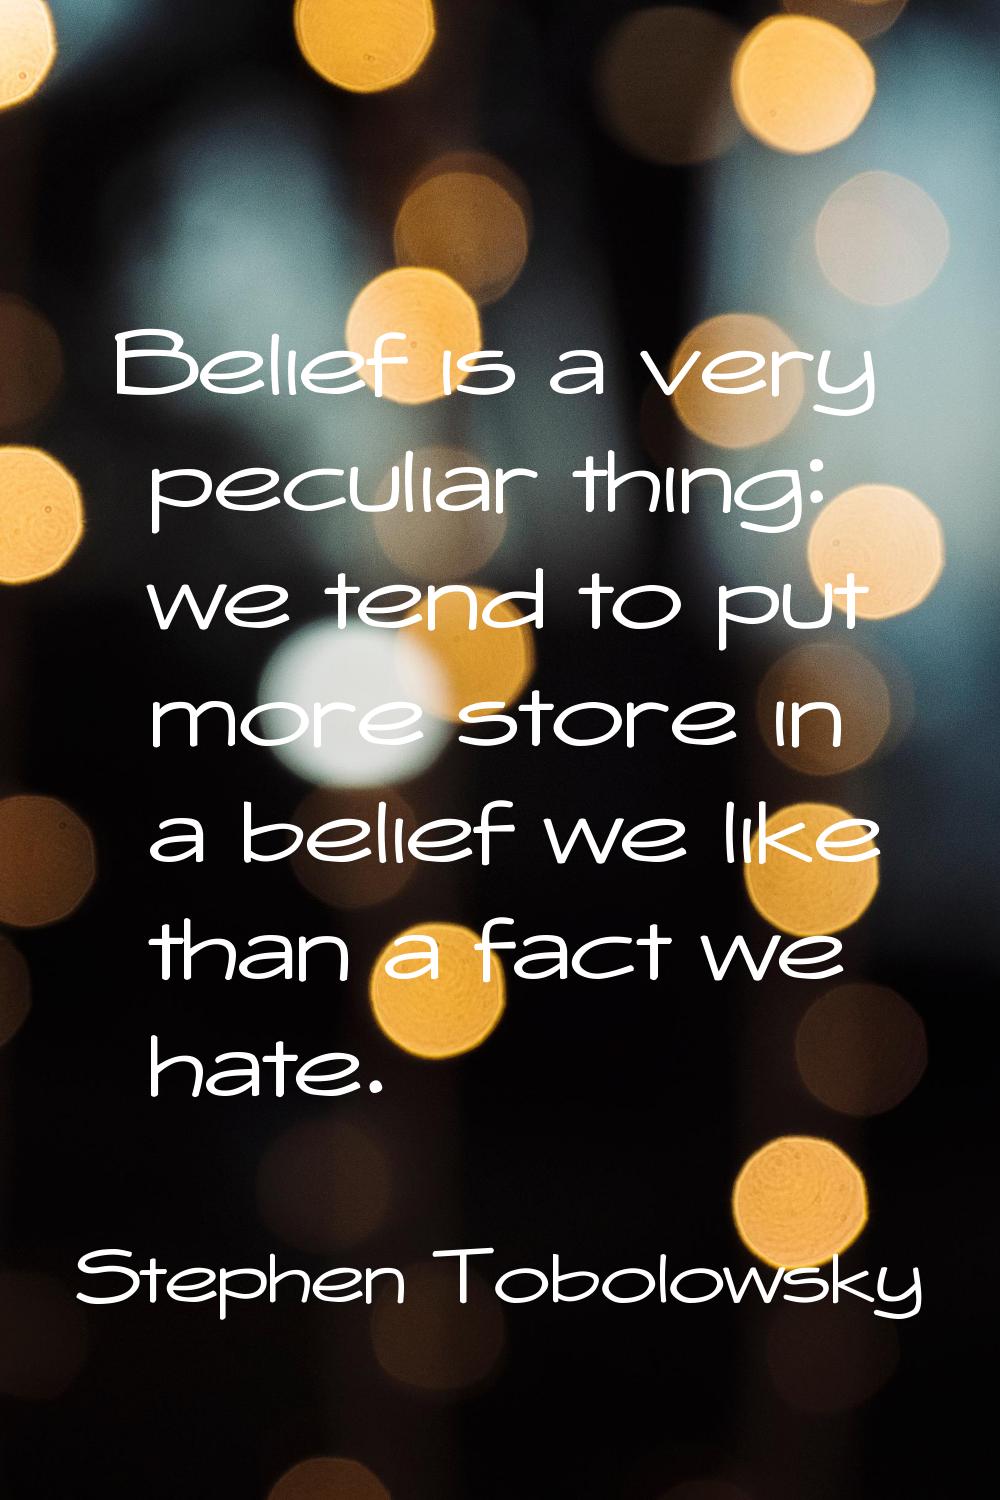 Belief is a very peculiar thing: we tend to put more store in a belief we like than a fact we hate.